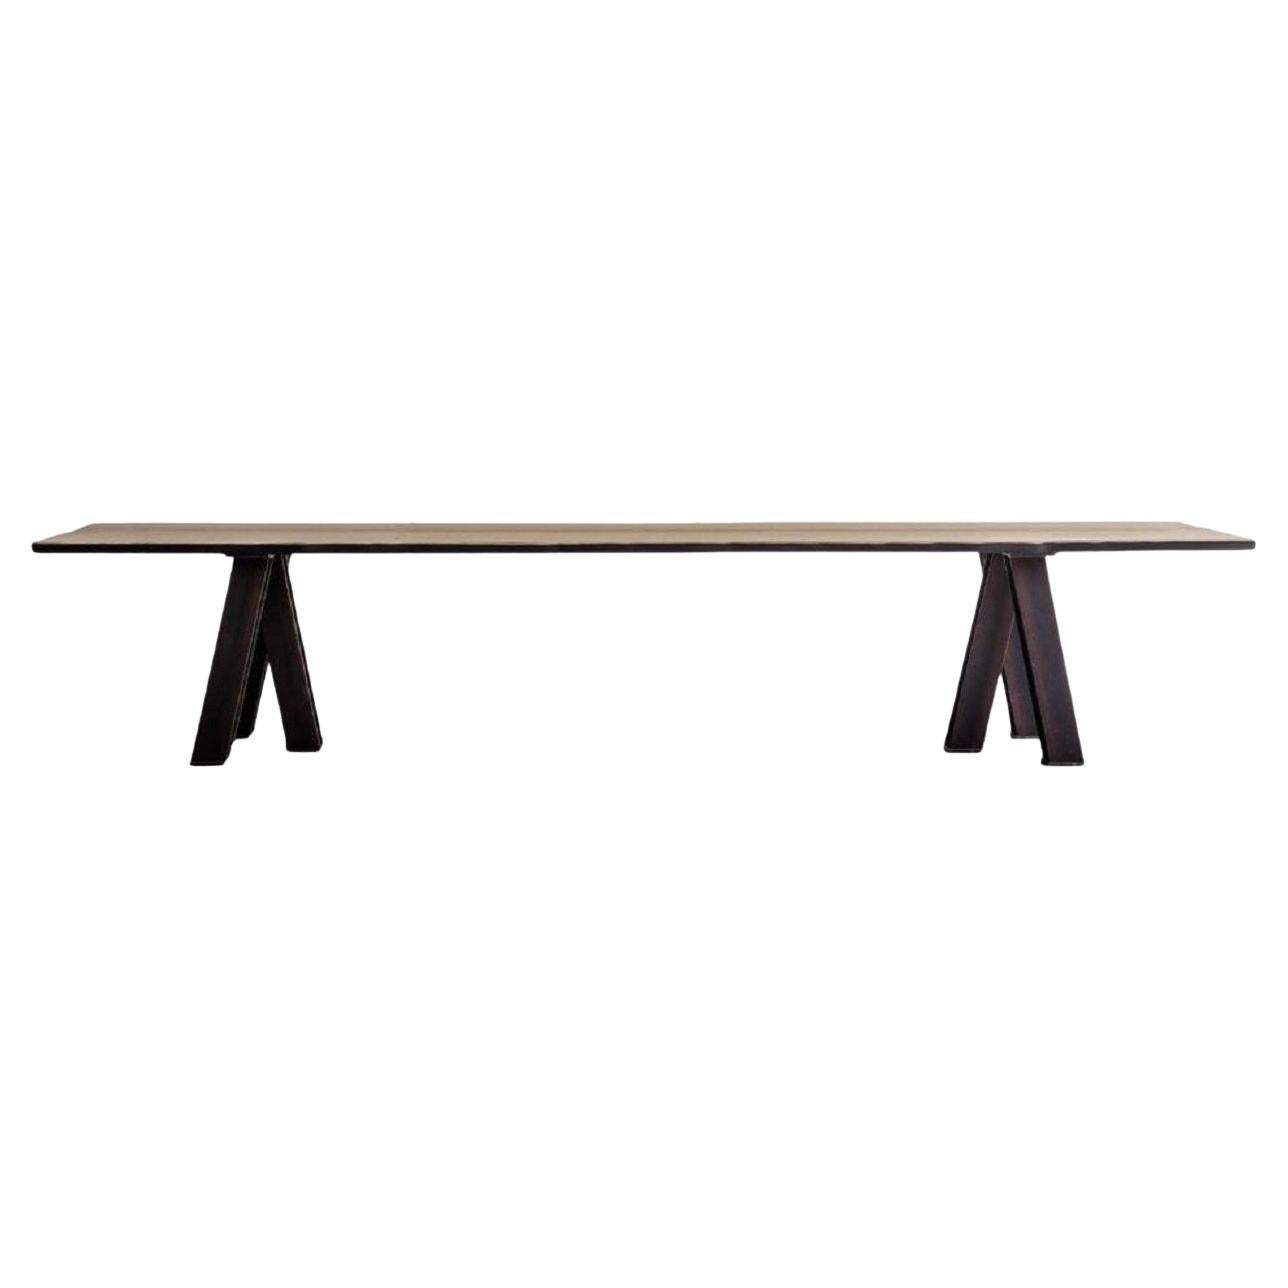 This dining table is made from solid rough oak over steel legs.
The top (approx 4cm) has blackened sapwood edges, made from the sides of the oak tree. Made to measure table, where almost any size is possible.
This item is made of solid wood.  Any